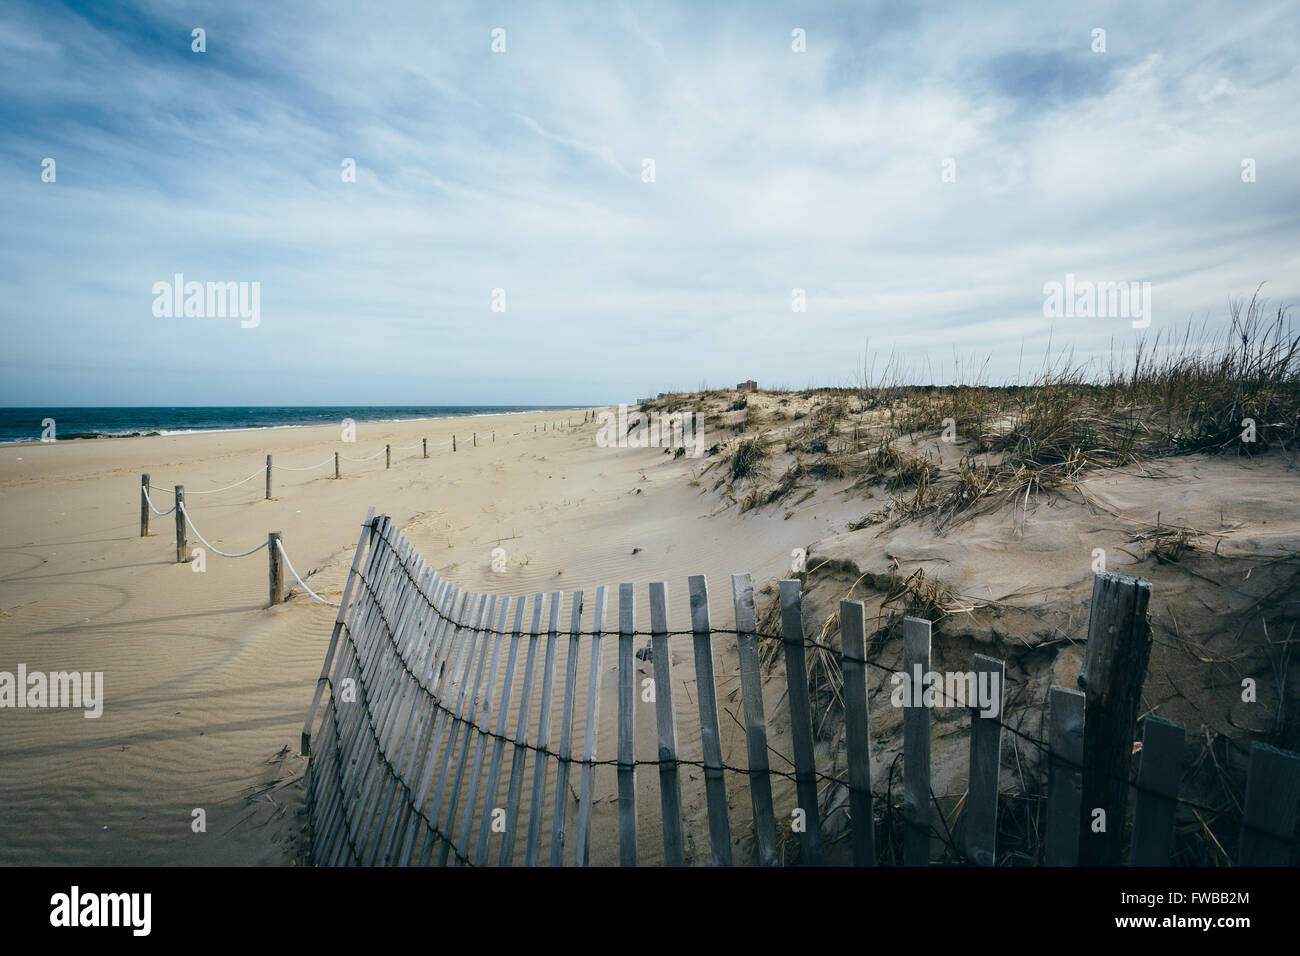 Fence and sand dunes at Cape Henlopen State Park in Rehoboth Beach, Delaware. Stock Photo